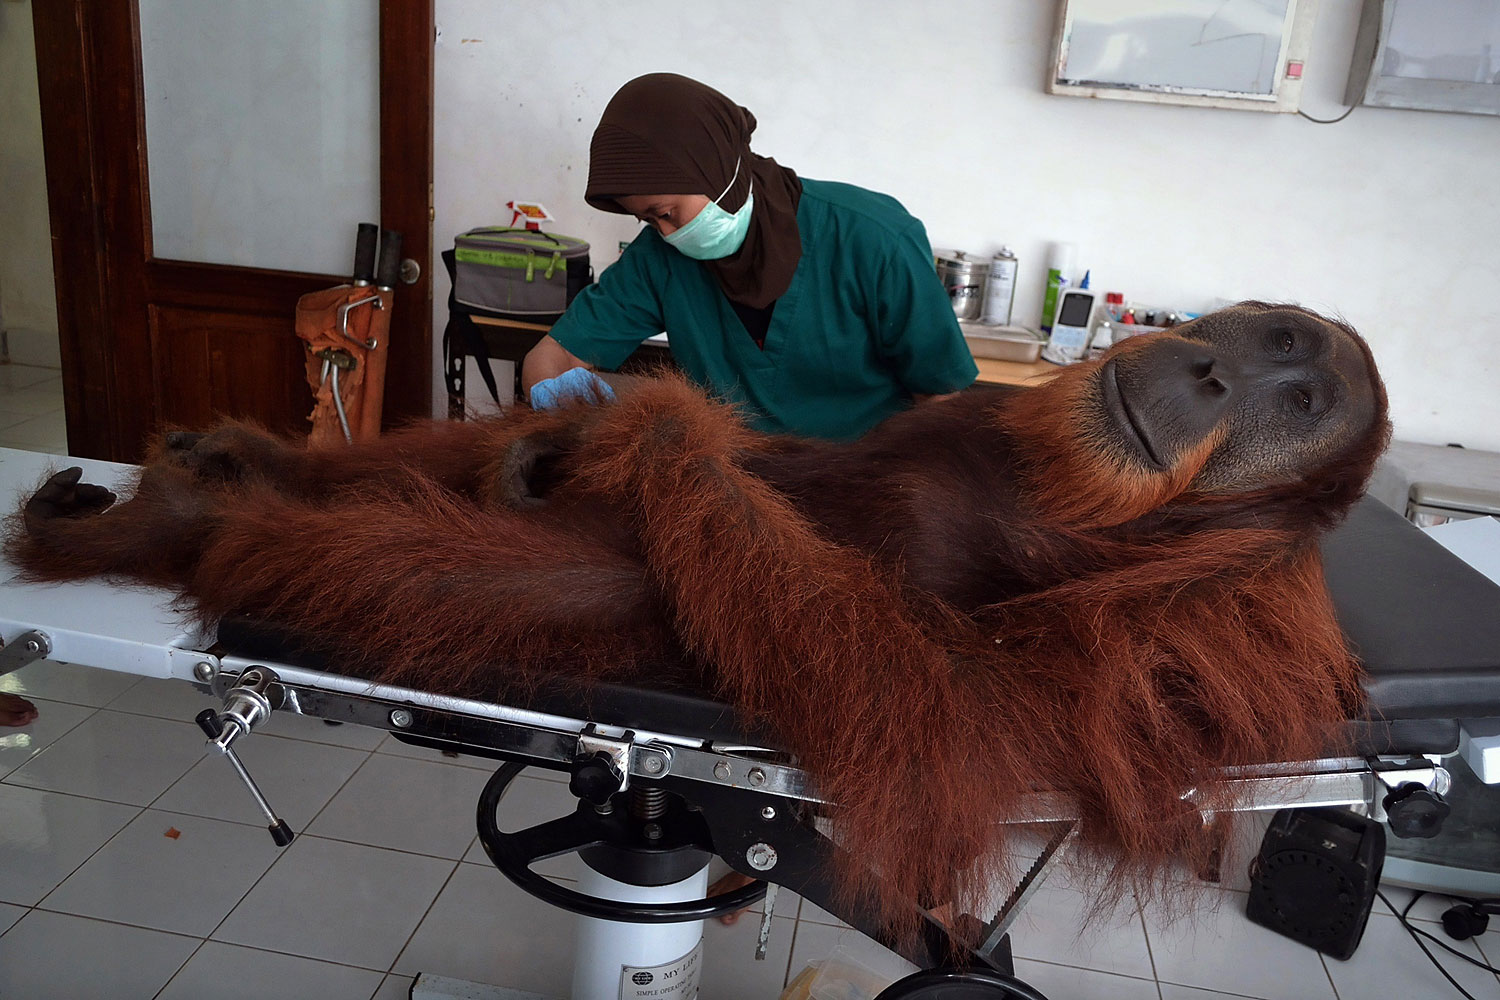 A veterinary staff member of the Sumatran Orangutan Conservation Programme center conducts medical examinations on a 14-year-old male orangutan found with air gun metal pellets embedded in his body in Sibolangit district in northern Sumatra island, April 16, 2014.